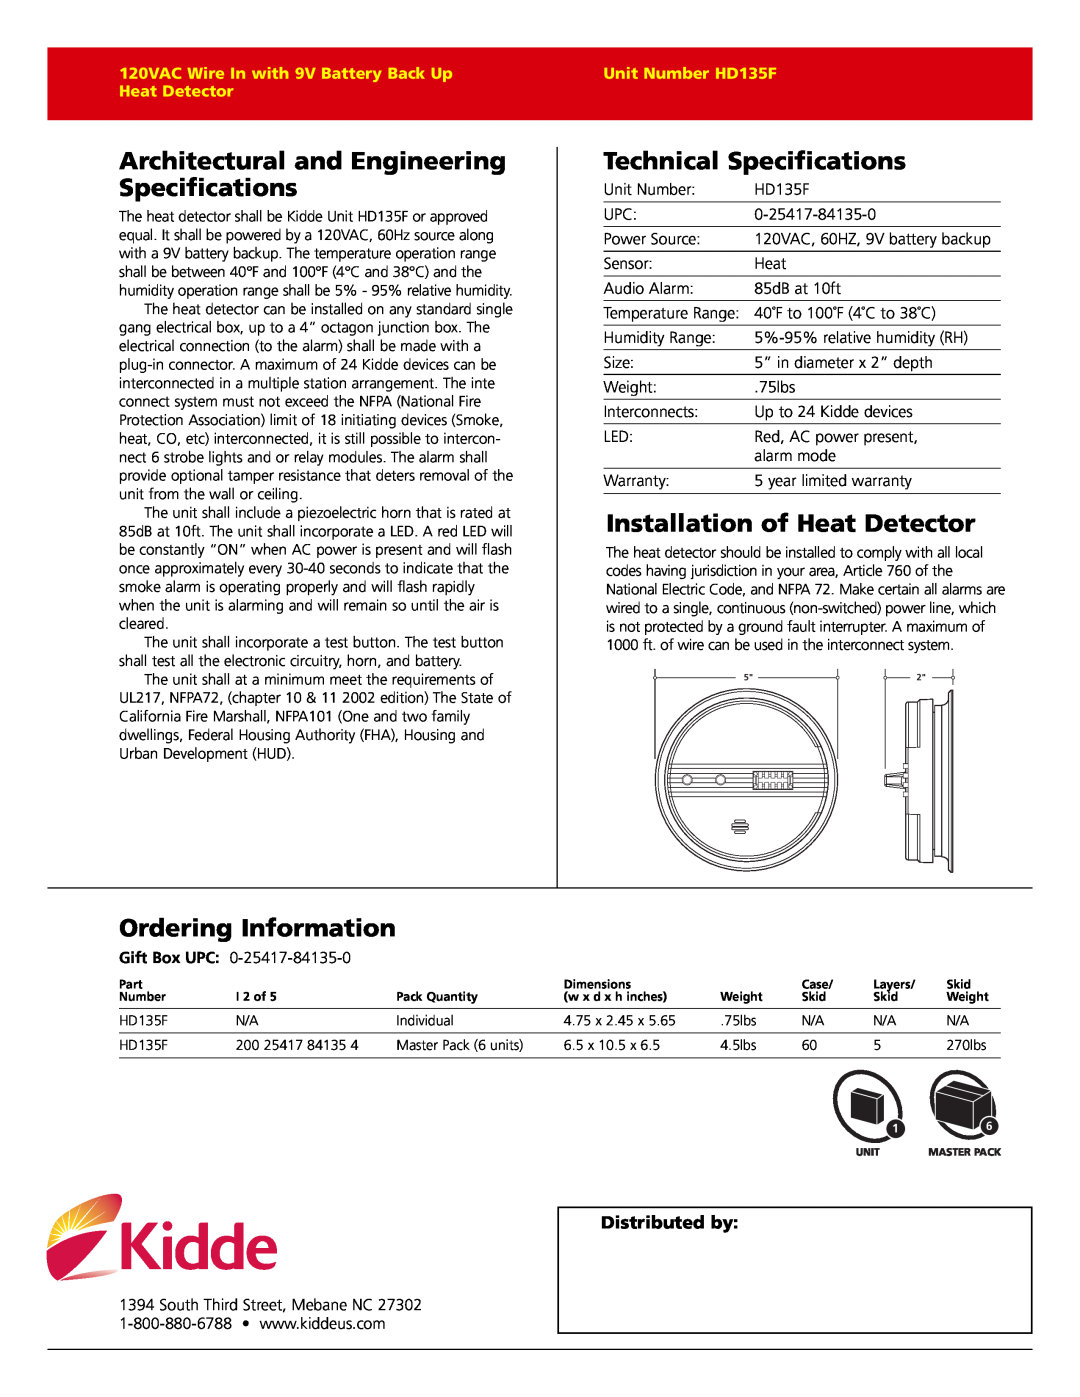 Kidde HD135F warranty Architectural and Engineering Specifications, Technical Specifications, Installation of Heat Detector 